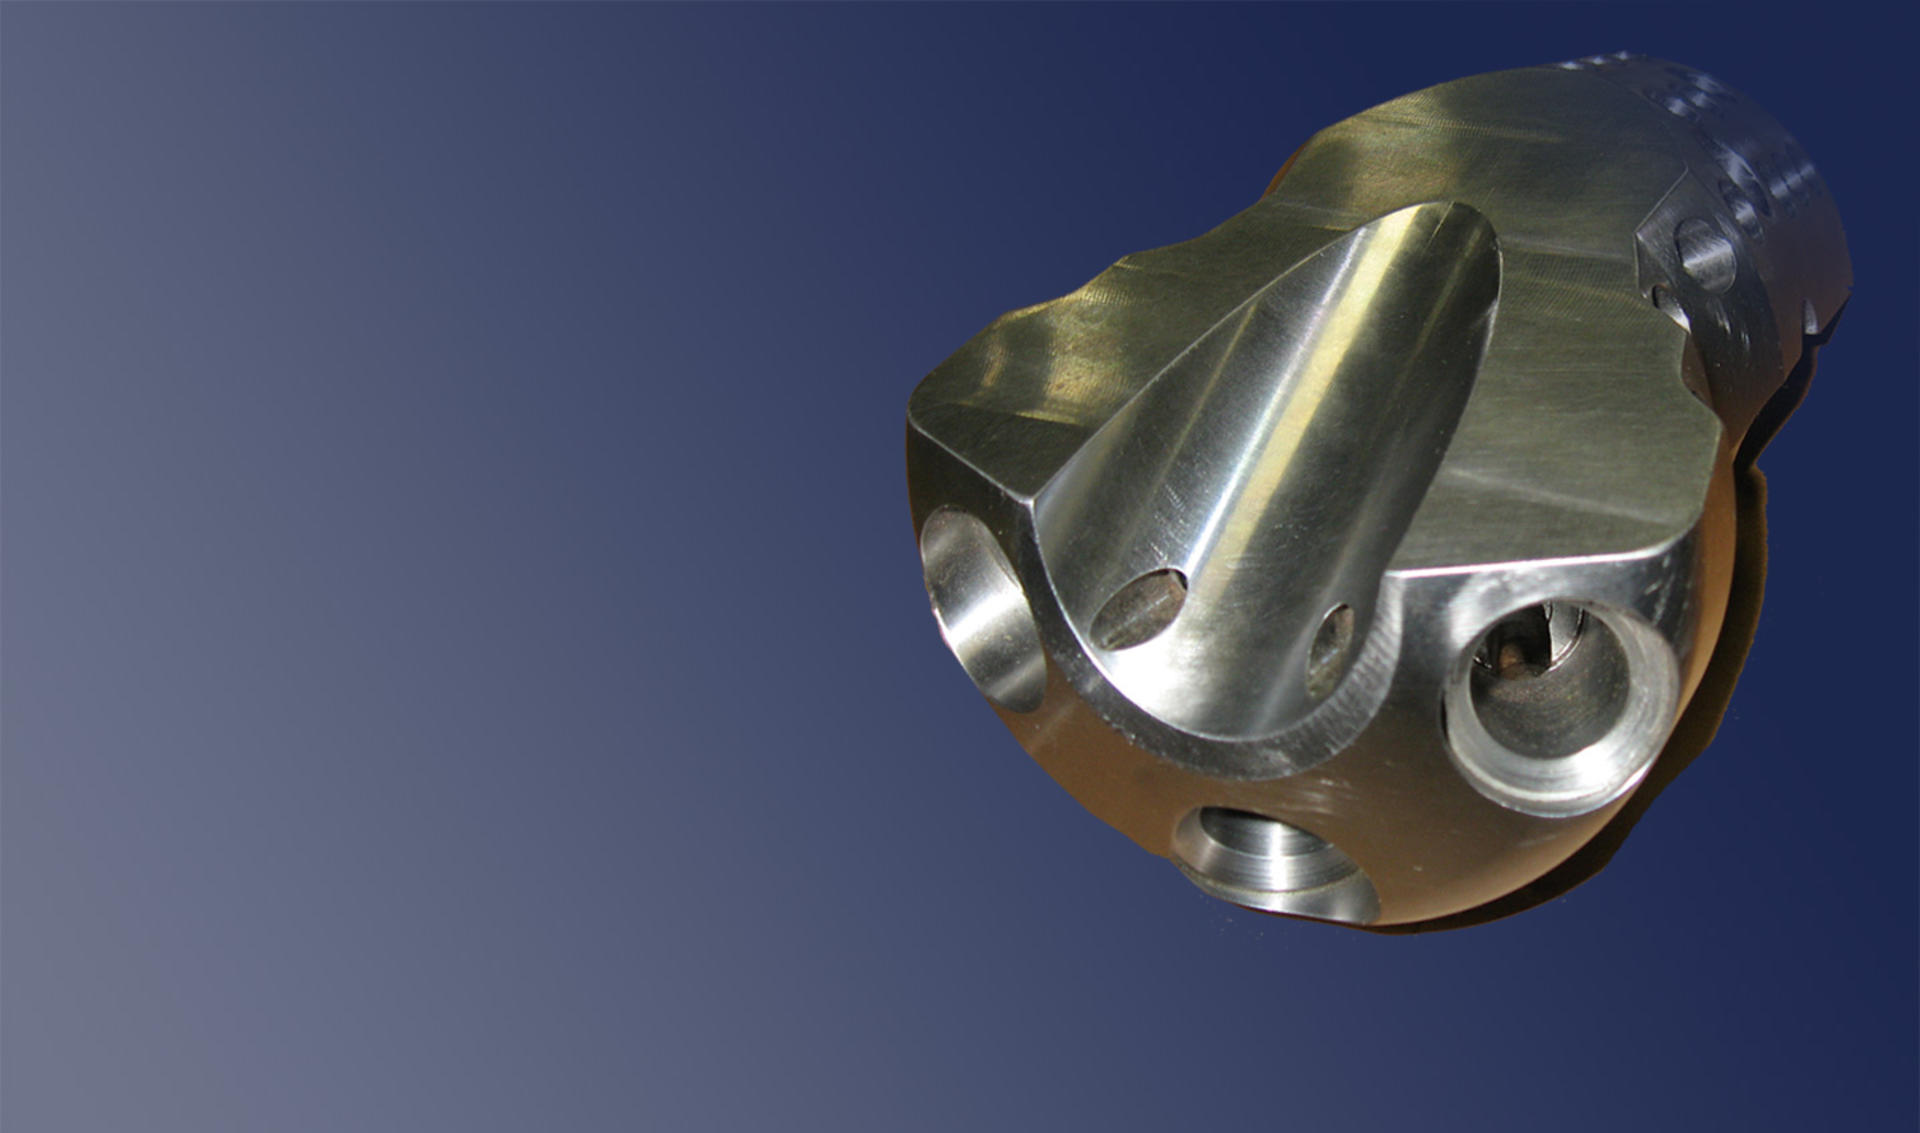 GibbsCAM Aids Productivity and Simplifies Complex Parts at Webber Metal Products